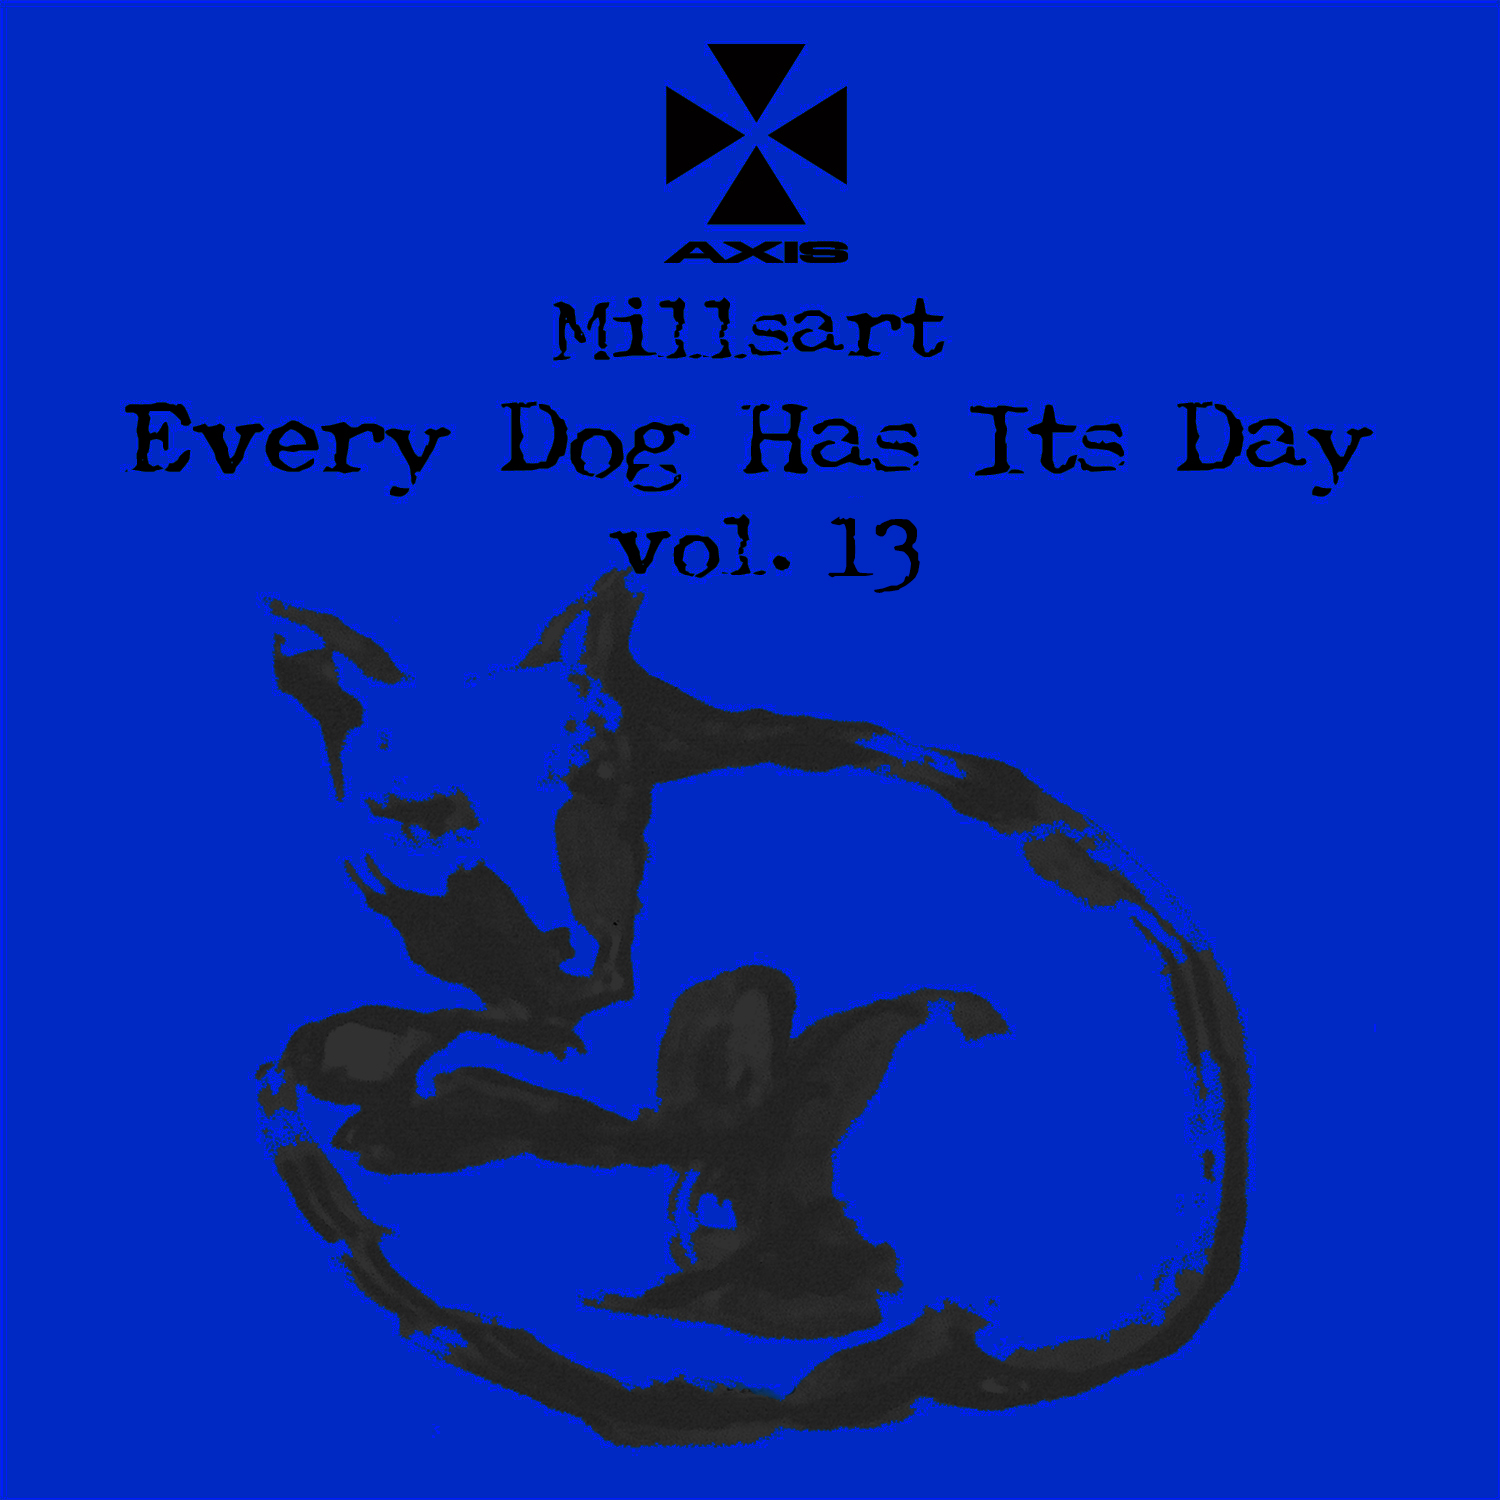 image cover: Millsart - Every Dog Has Its Day Vol. 13 / Axis